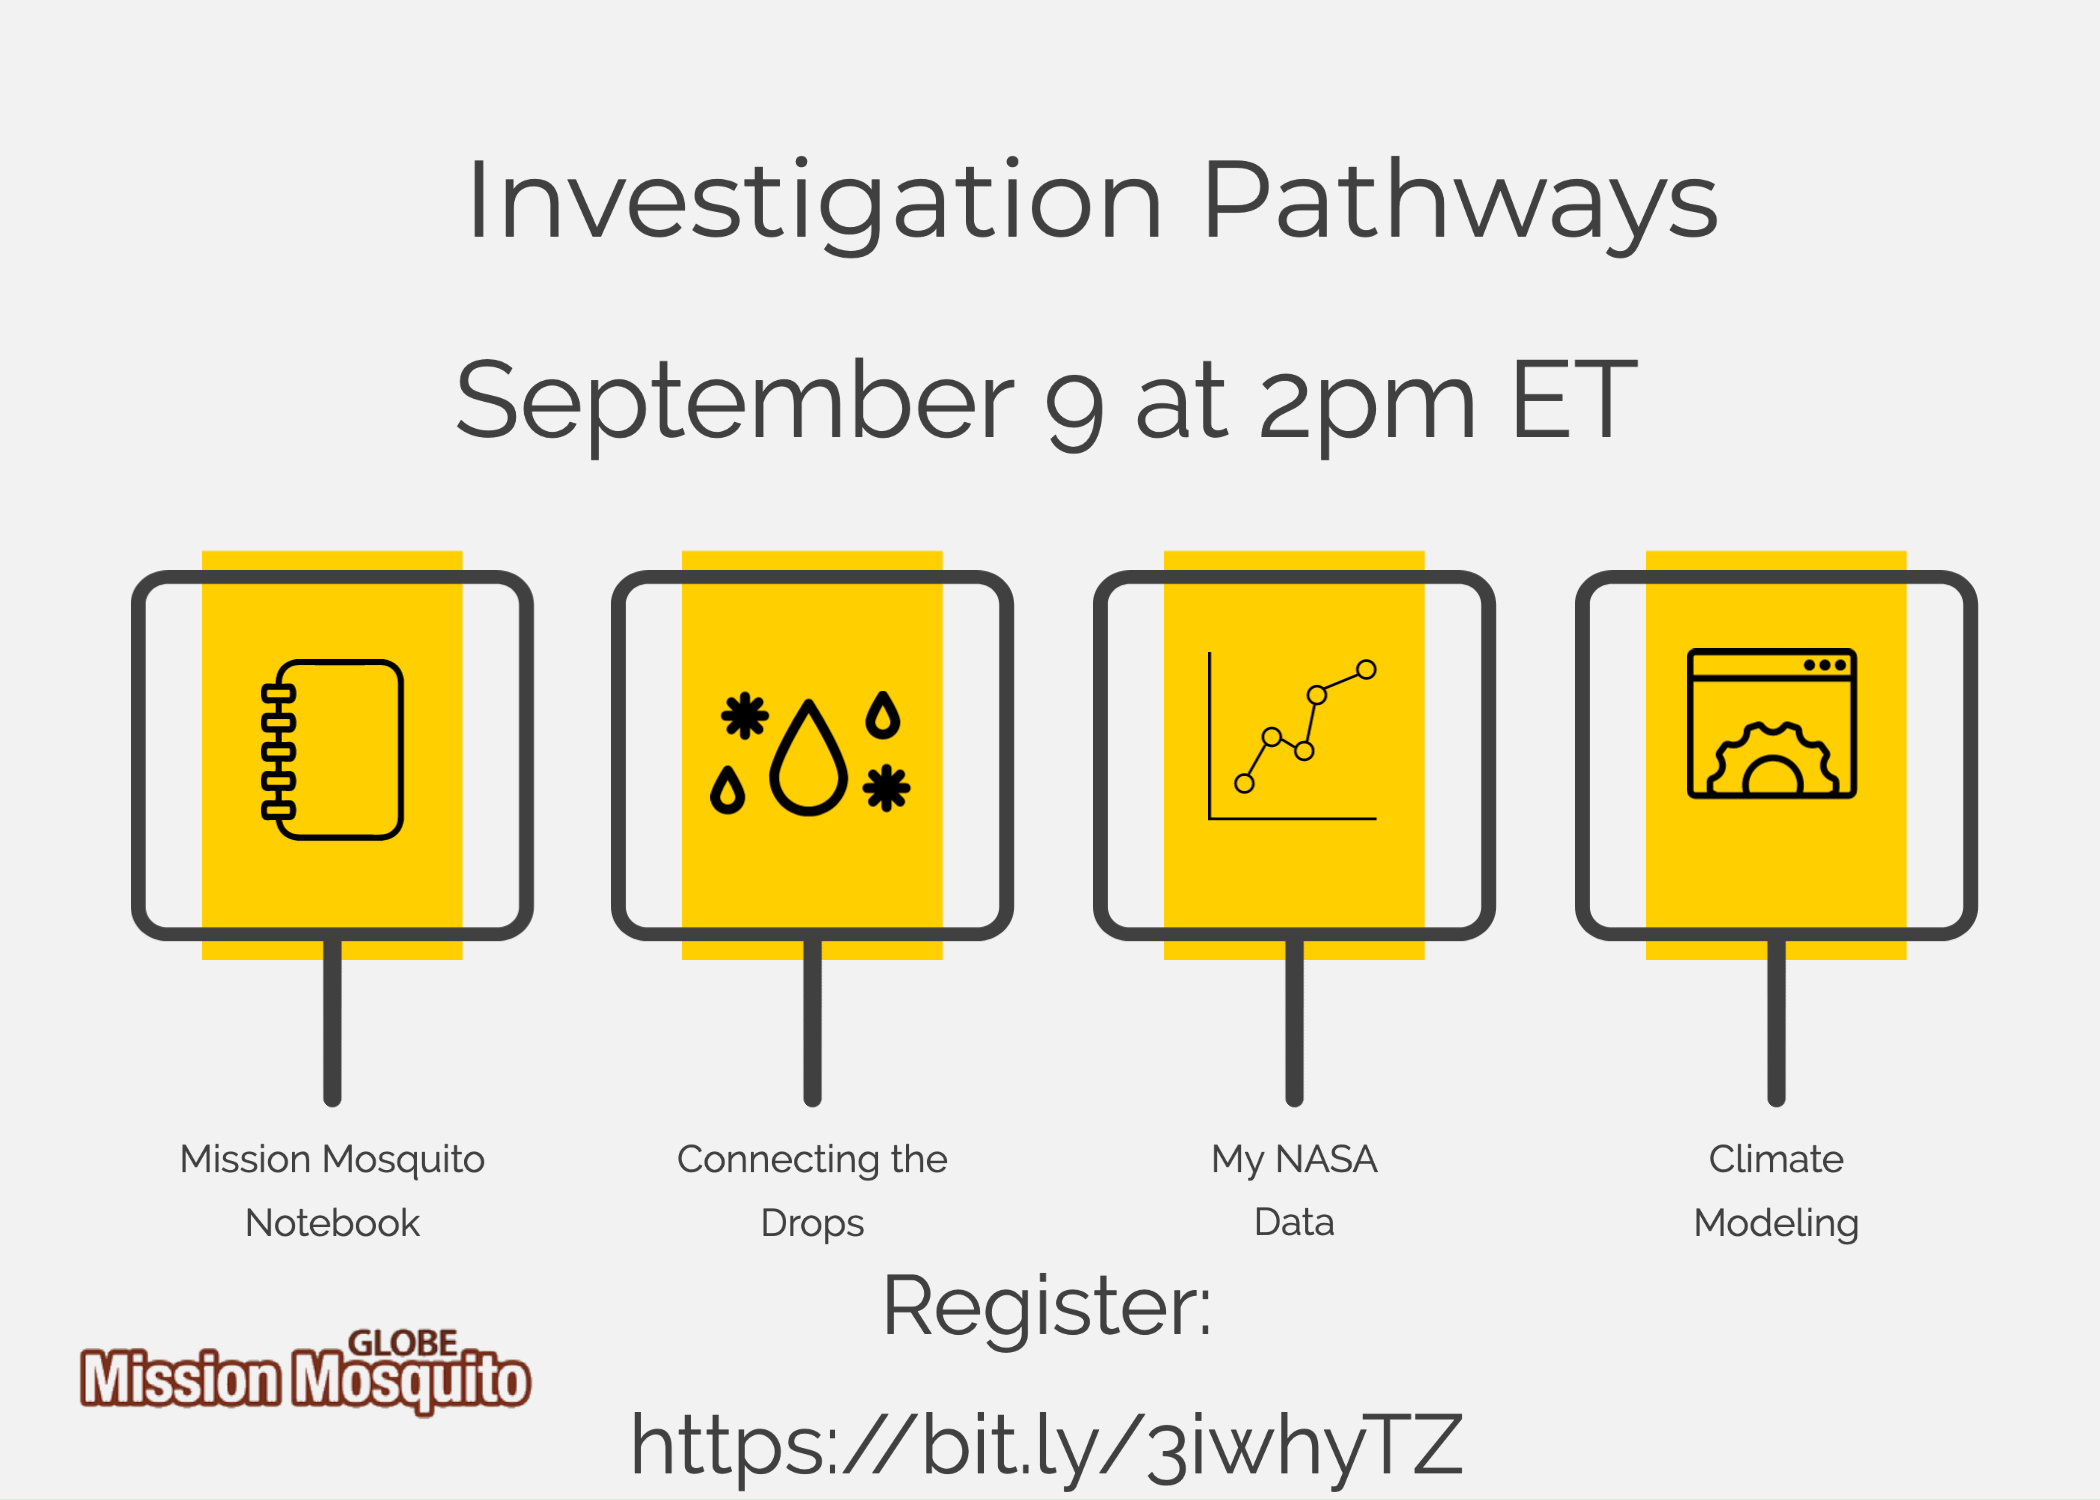 GLOBE Mission Mosquito 09 September webinar shareable showing four pathways to webinar options